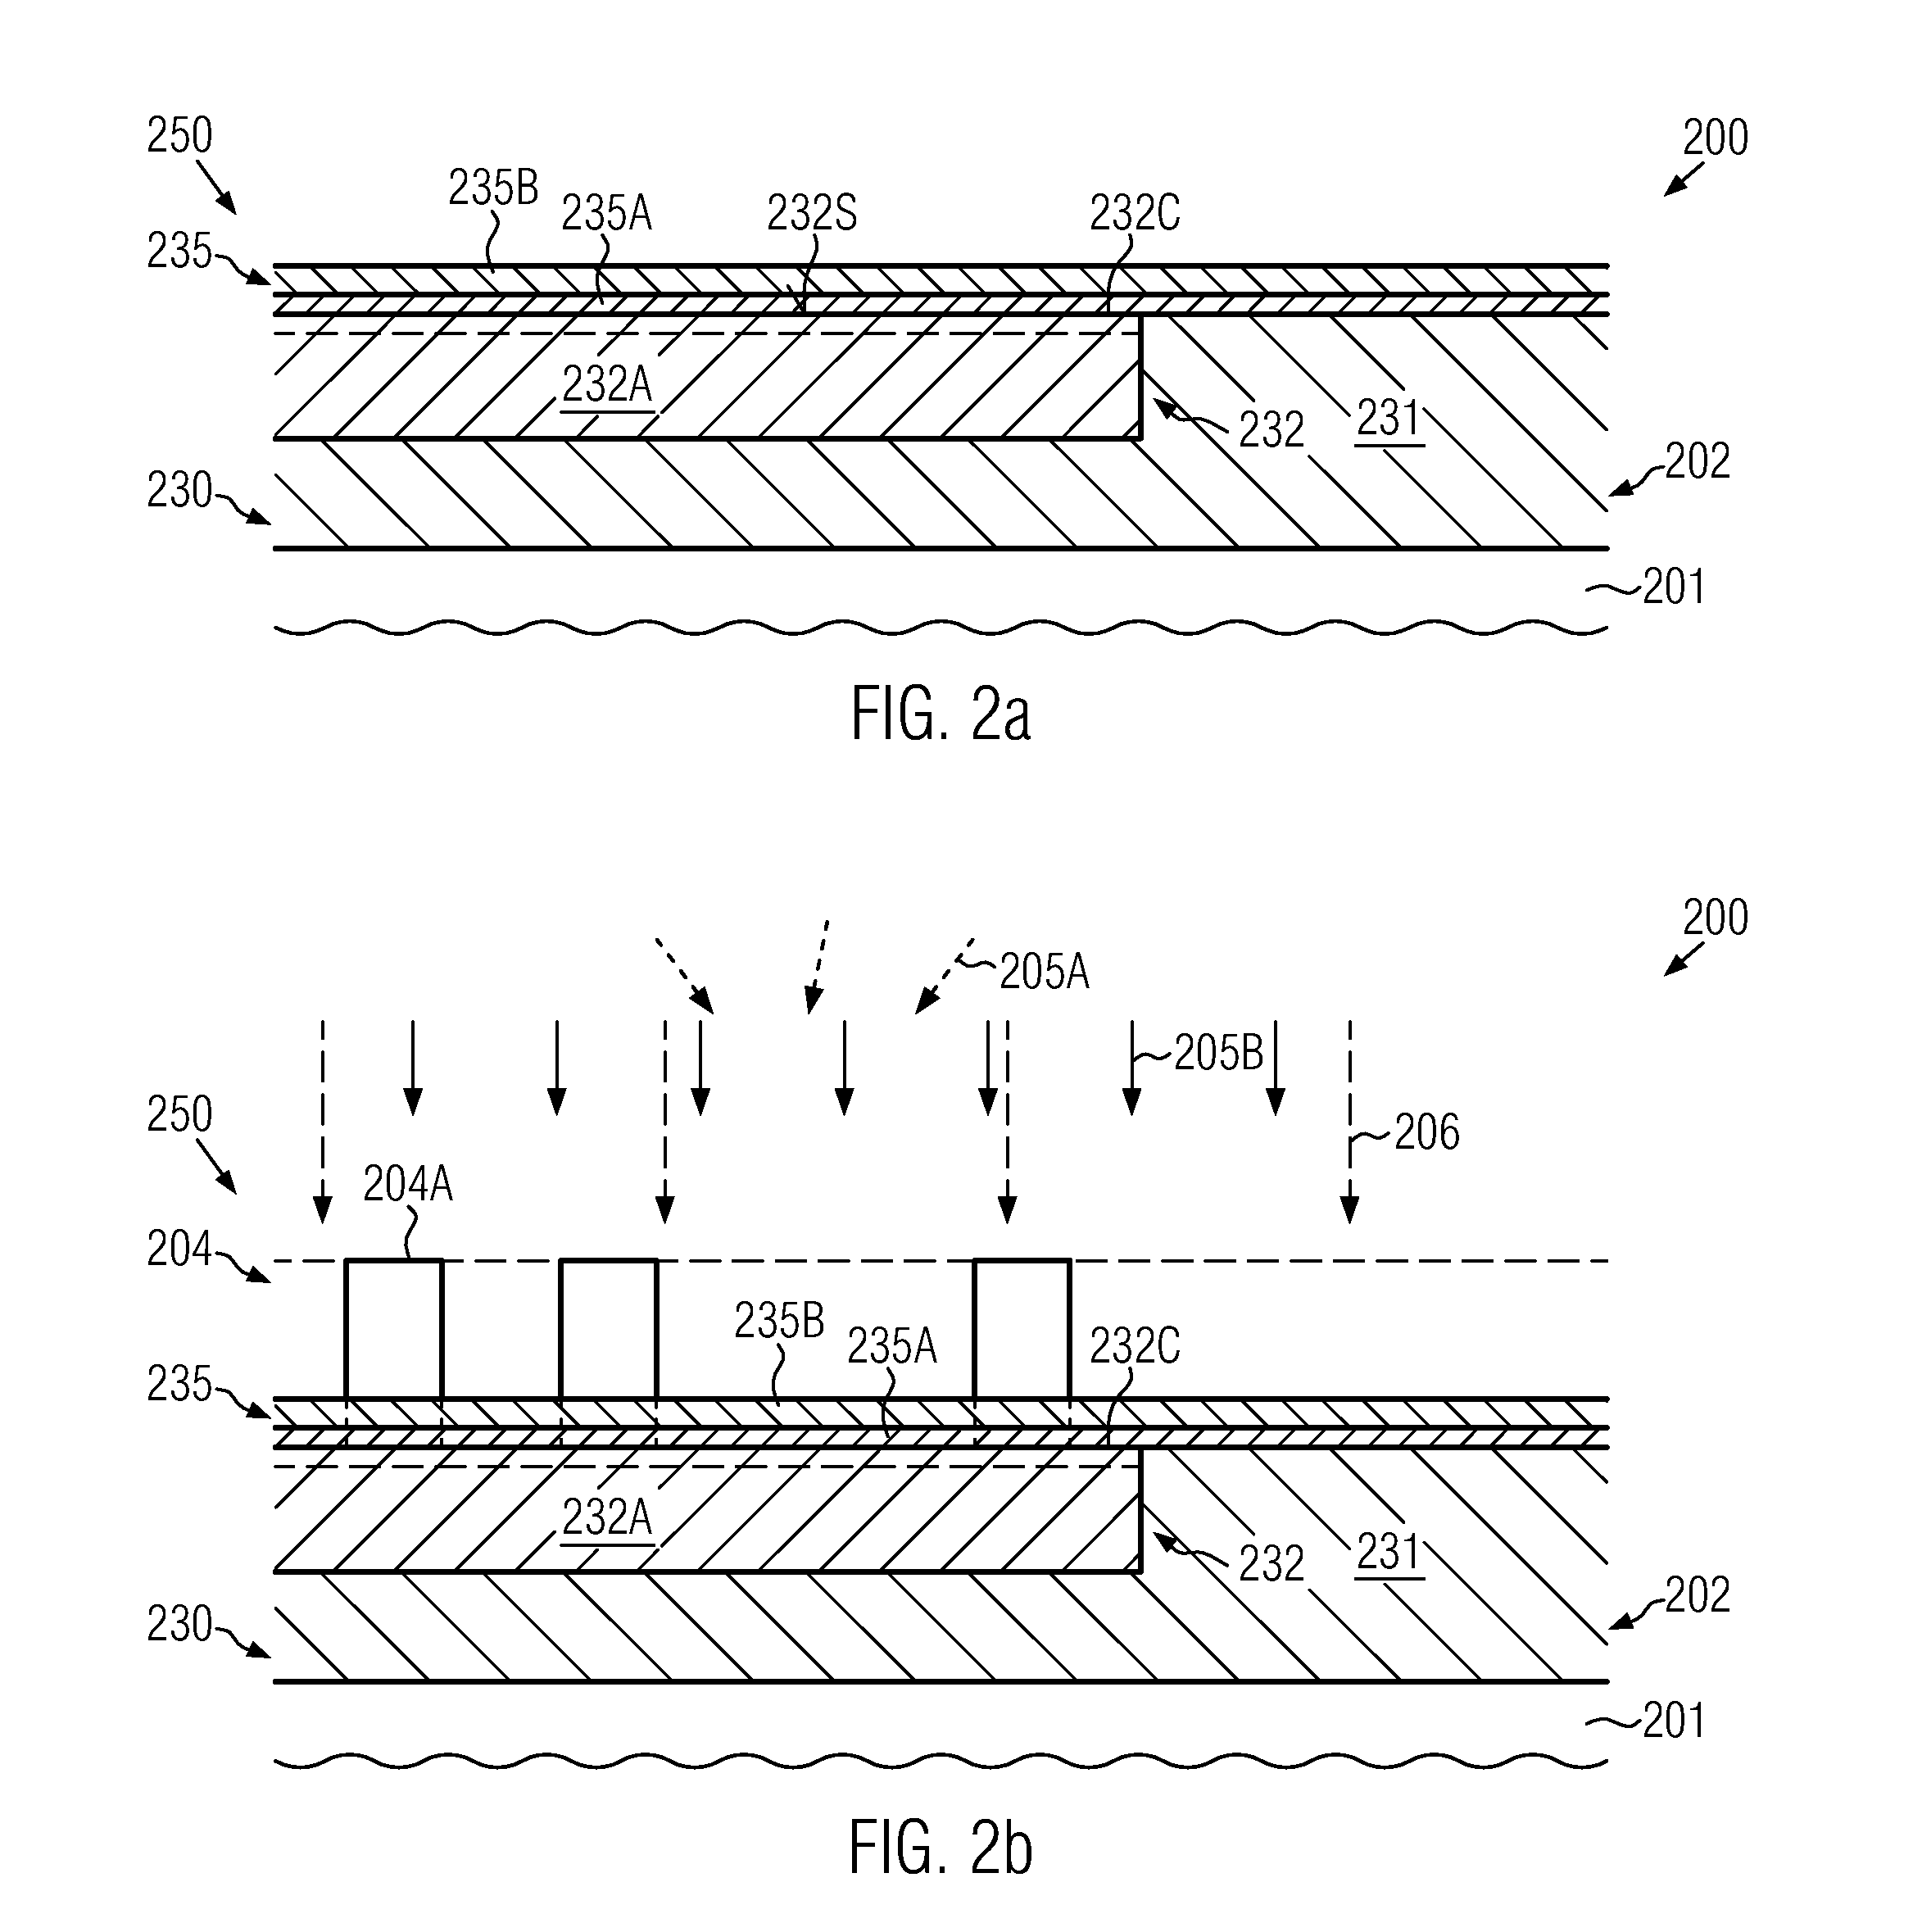 Semiconductor device comprising metallization layers of reduced interlayer capacitance by reducing the amount of etch stop materials